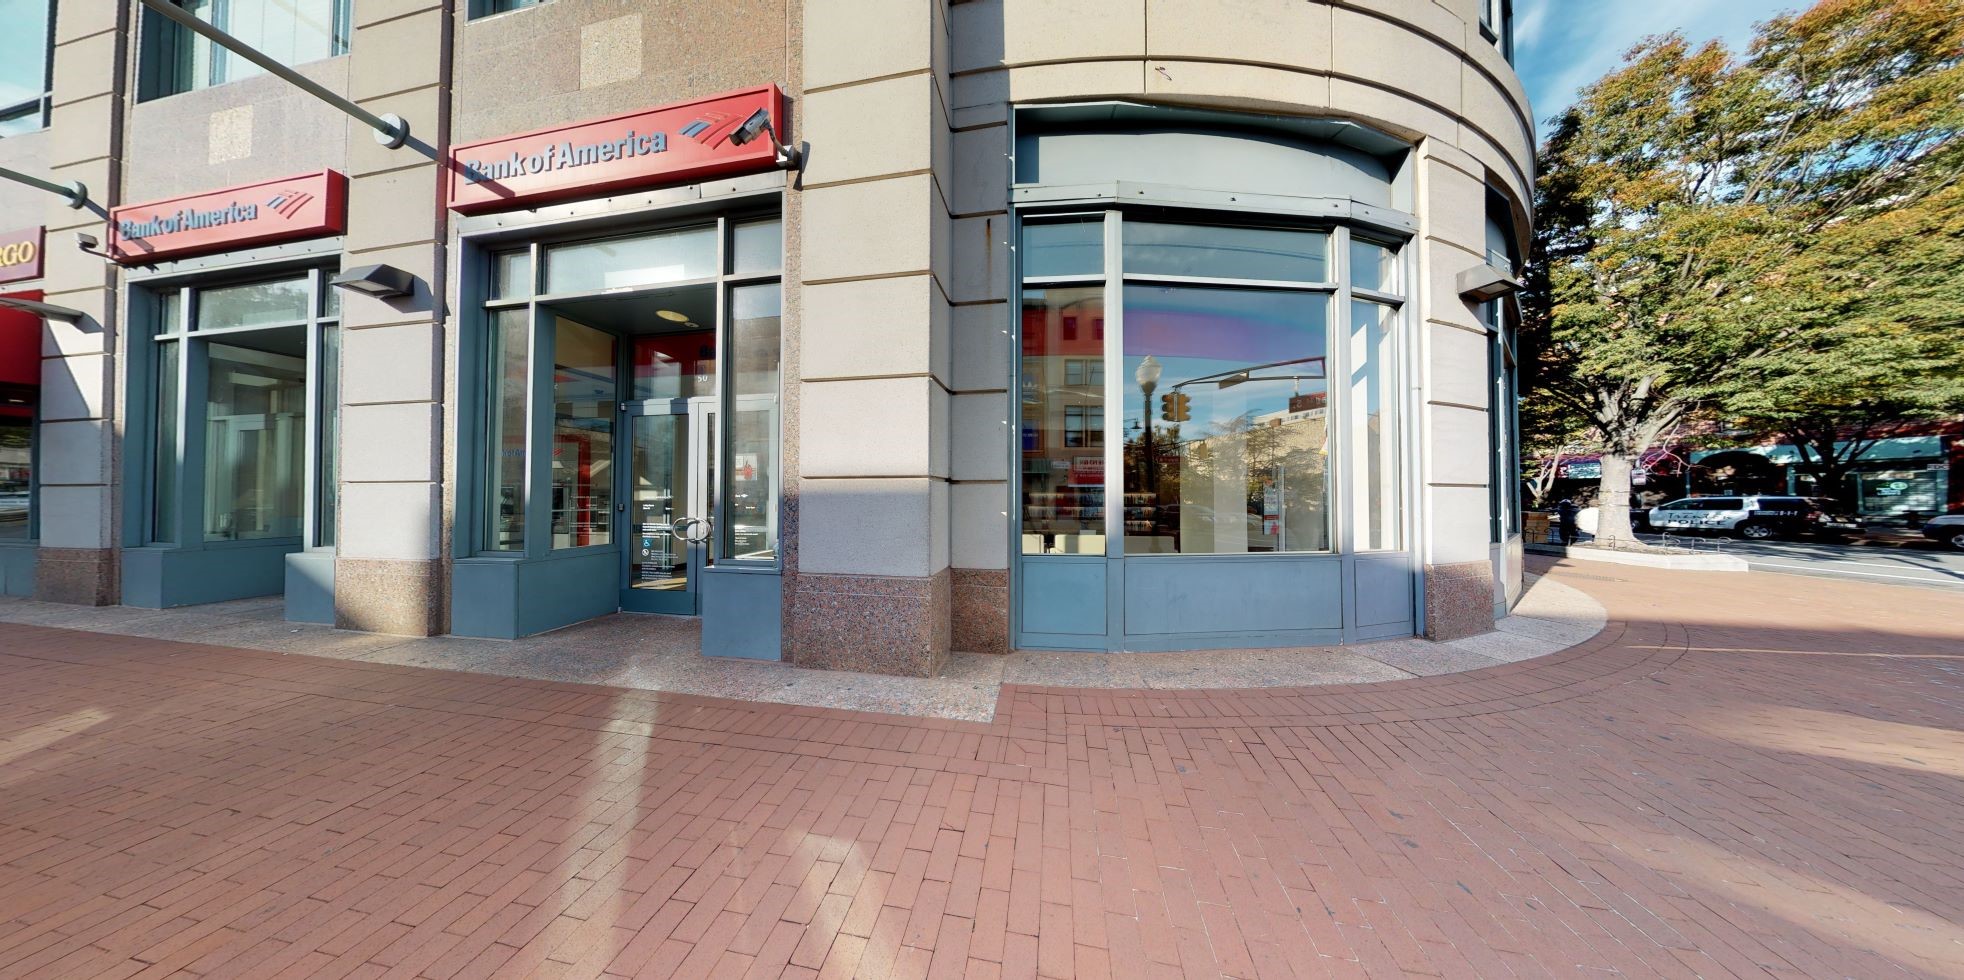 Bank of America financial center with walk-up ATM | 50 E State St, Trenton, NJ 08608